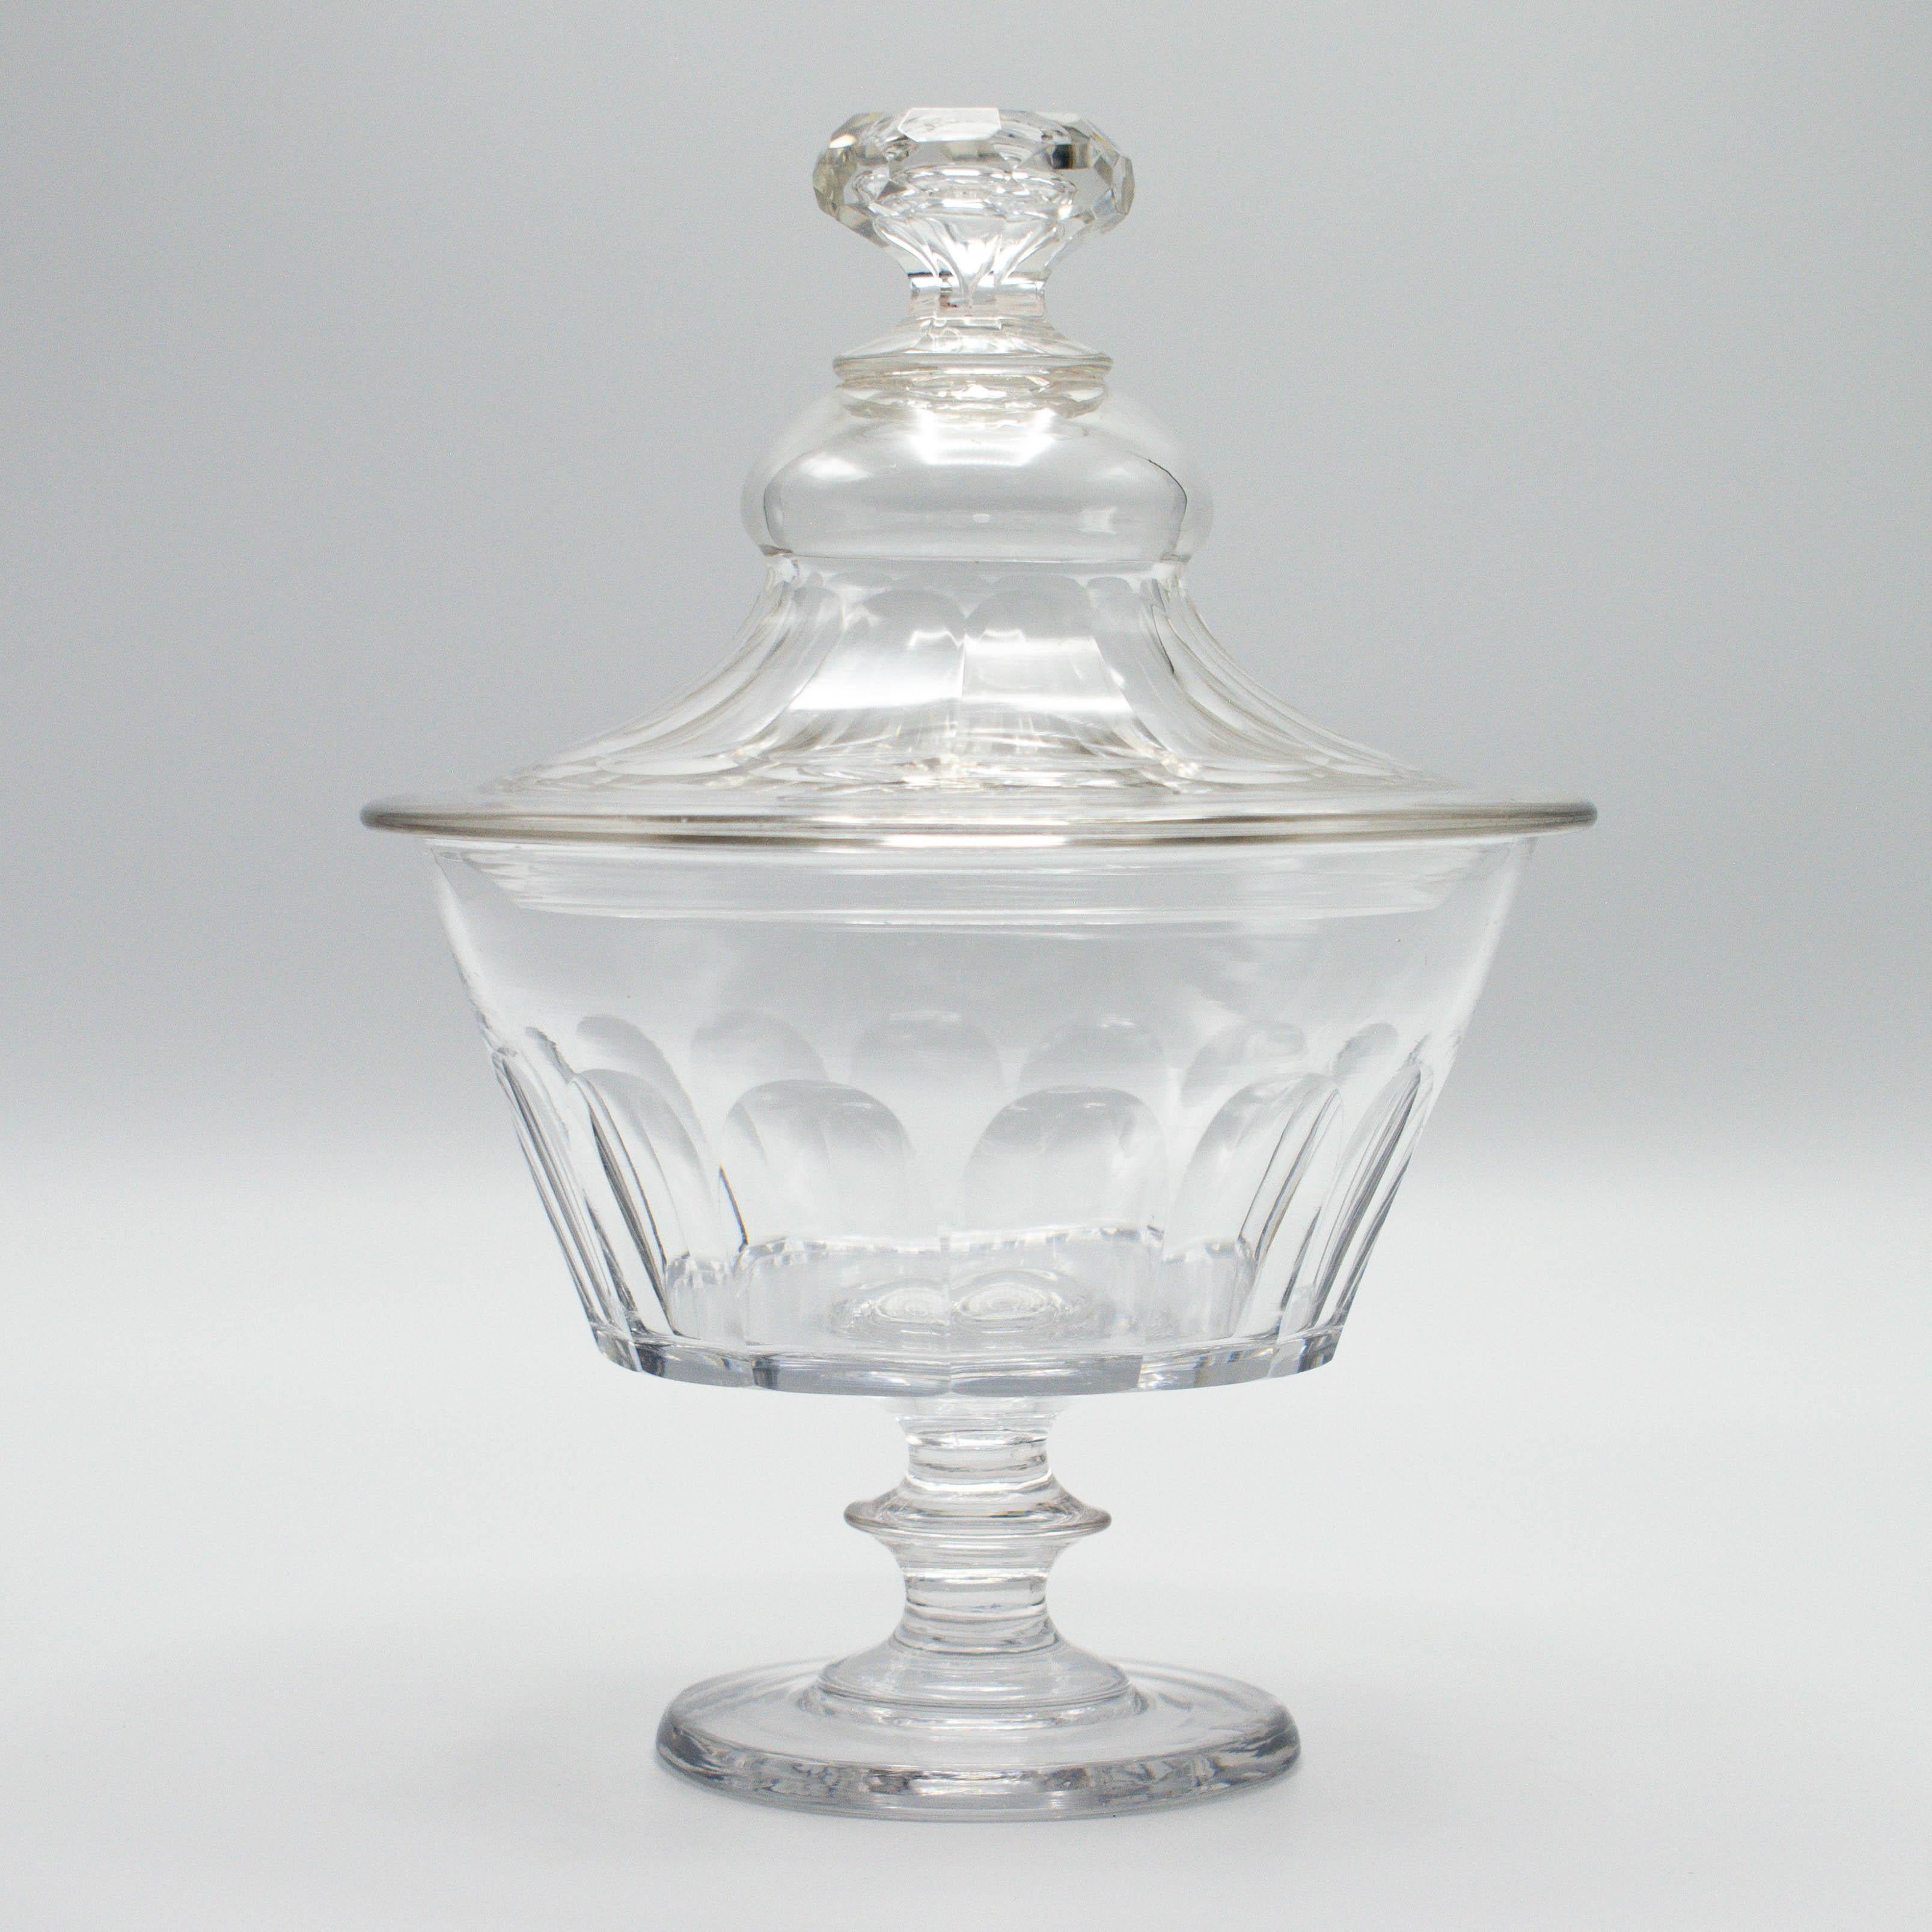 A small French glass lidded bon bon or candy jar with faceted sides, pedestal base and cut glass knob. Also perfect for use in a vanity. Purchased from a confiserie, or sweet shop, along many glass jars of various sizes. Please see other listings.